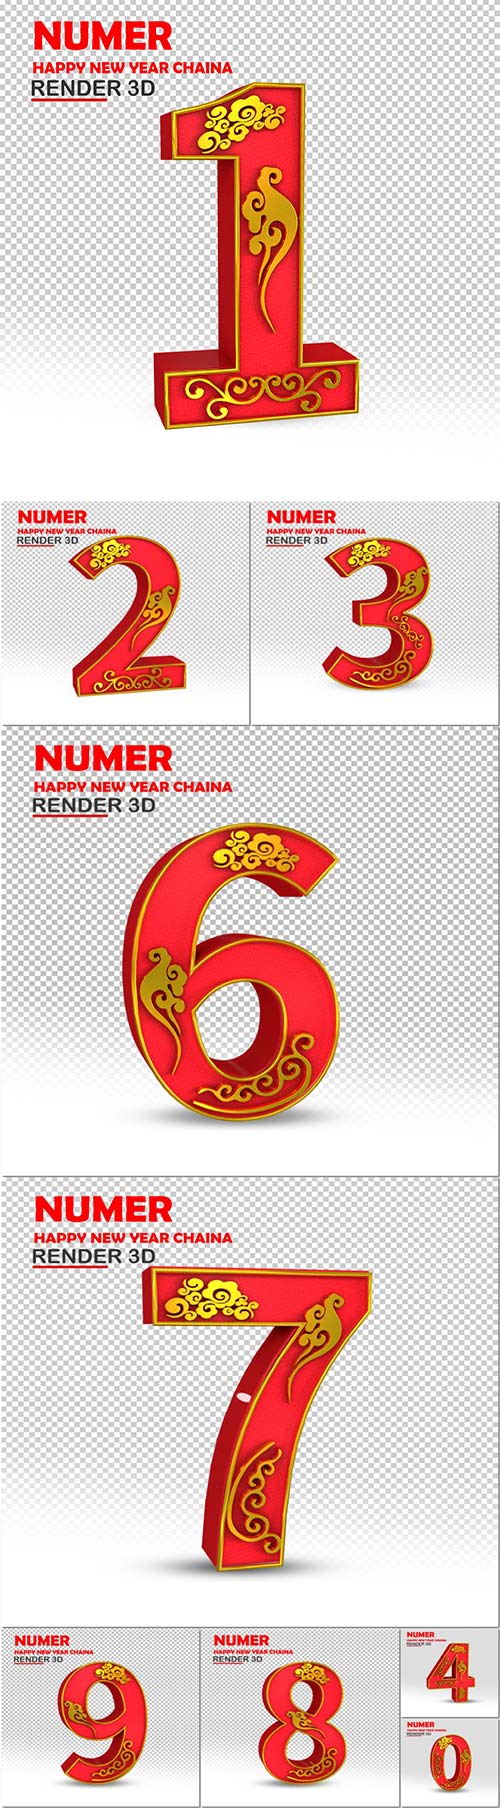 3d number happy new china psd